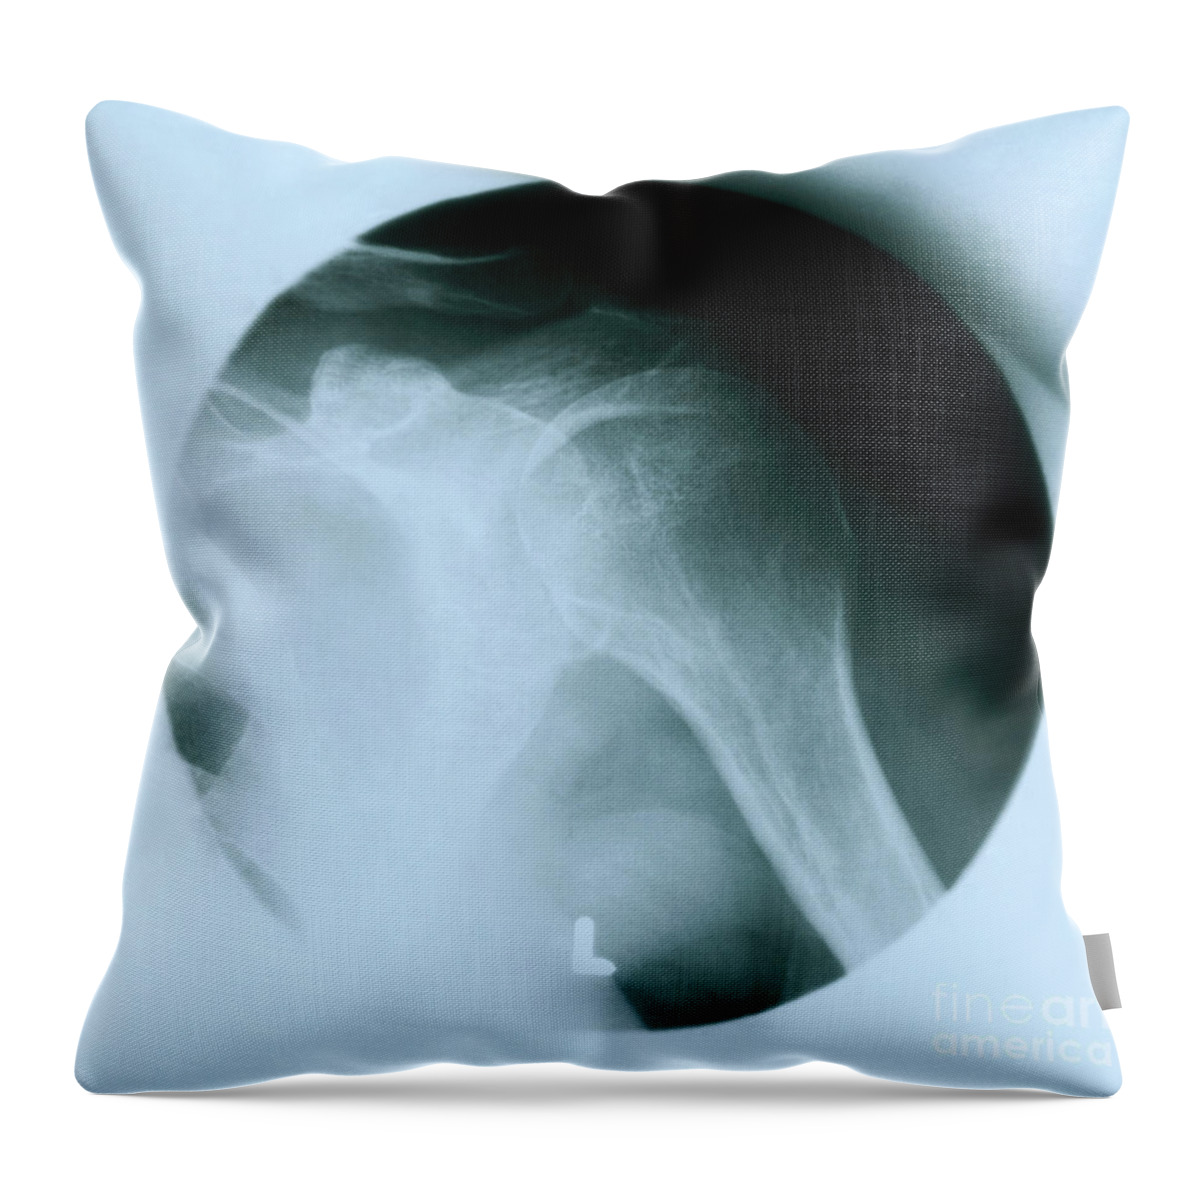 Arthrogram Throw Pillow featuring the photograph Arthrogram Of Left Shoulder #2 by Science Source